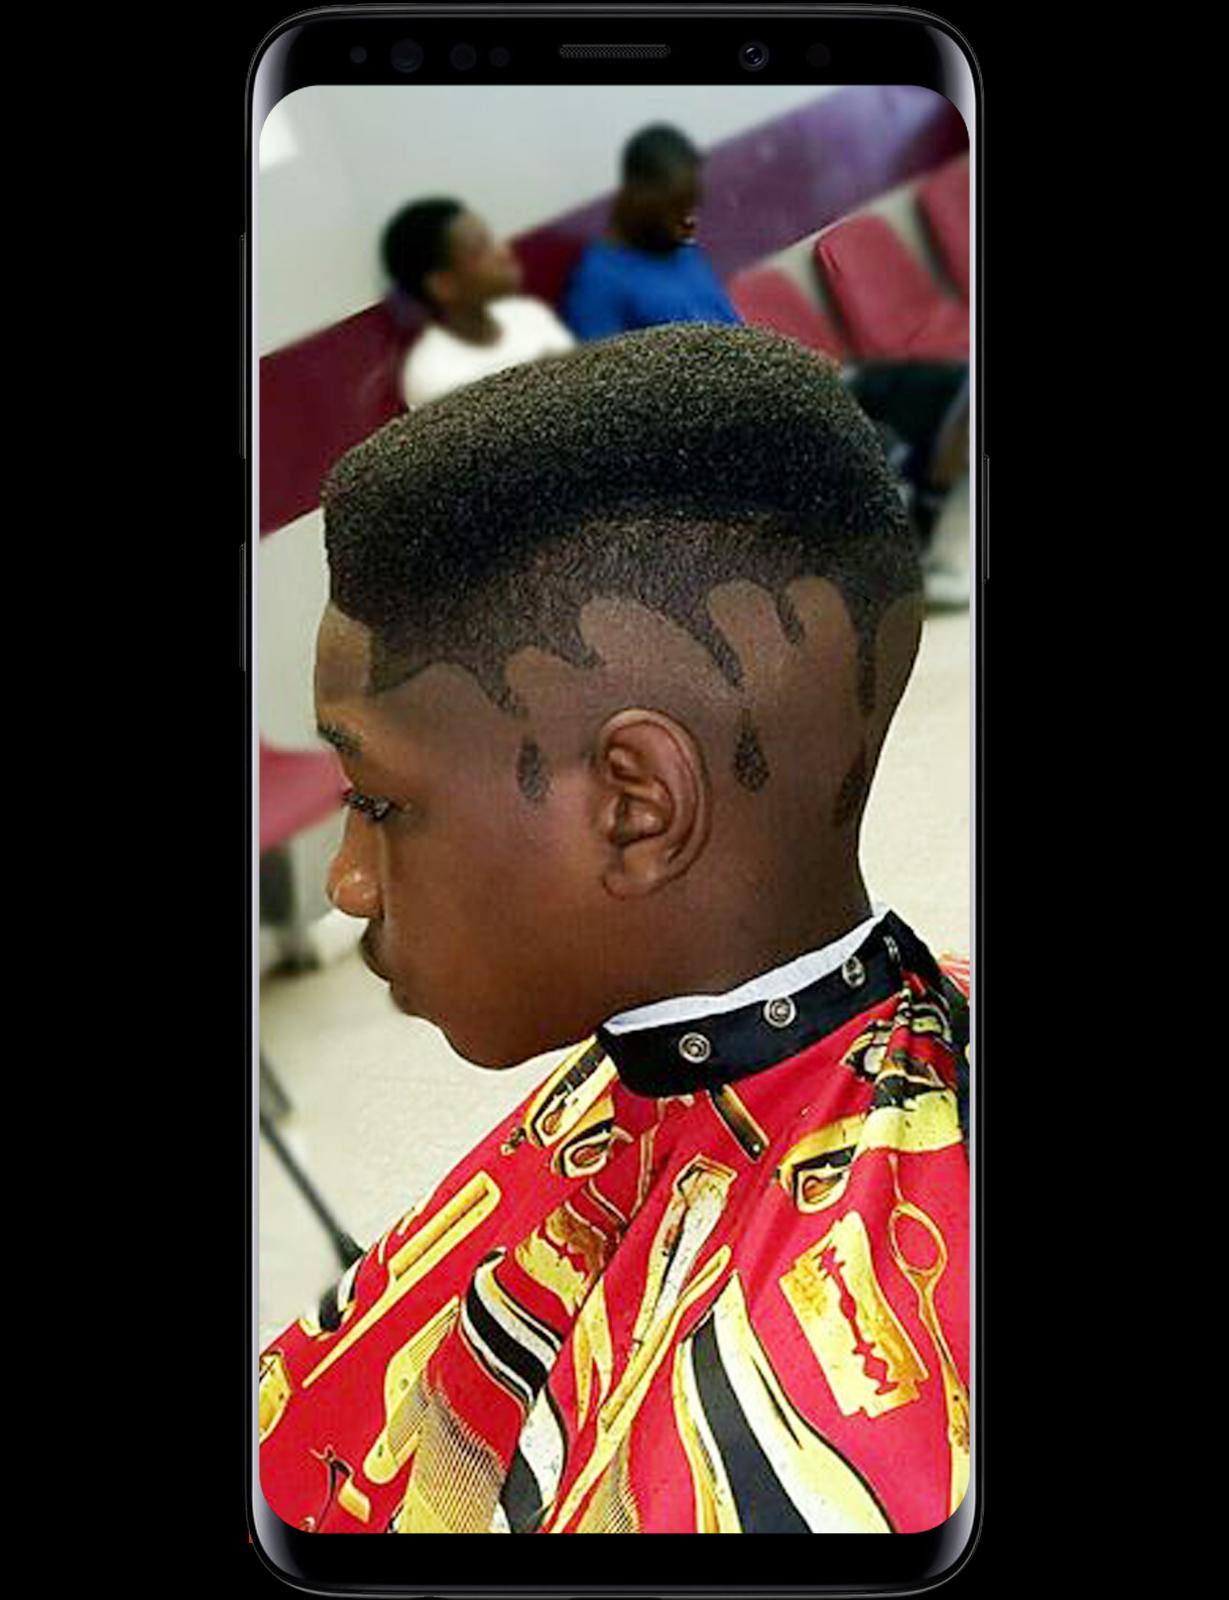 Cool Black Kids Haircuts For Android Apk Download